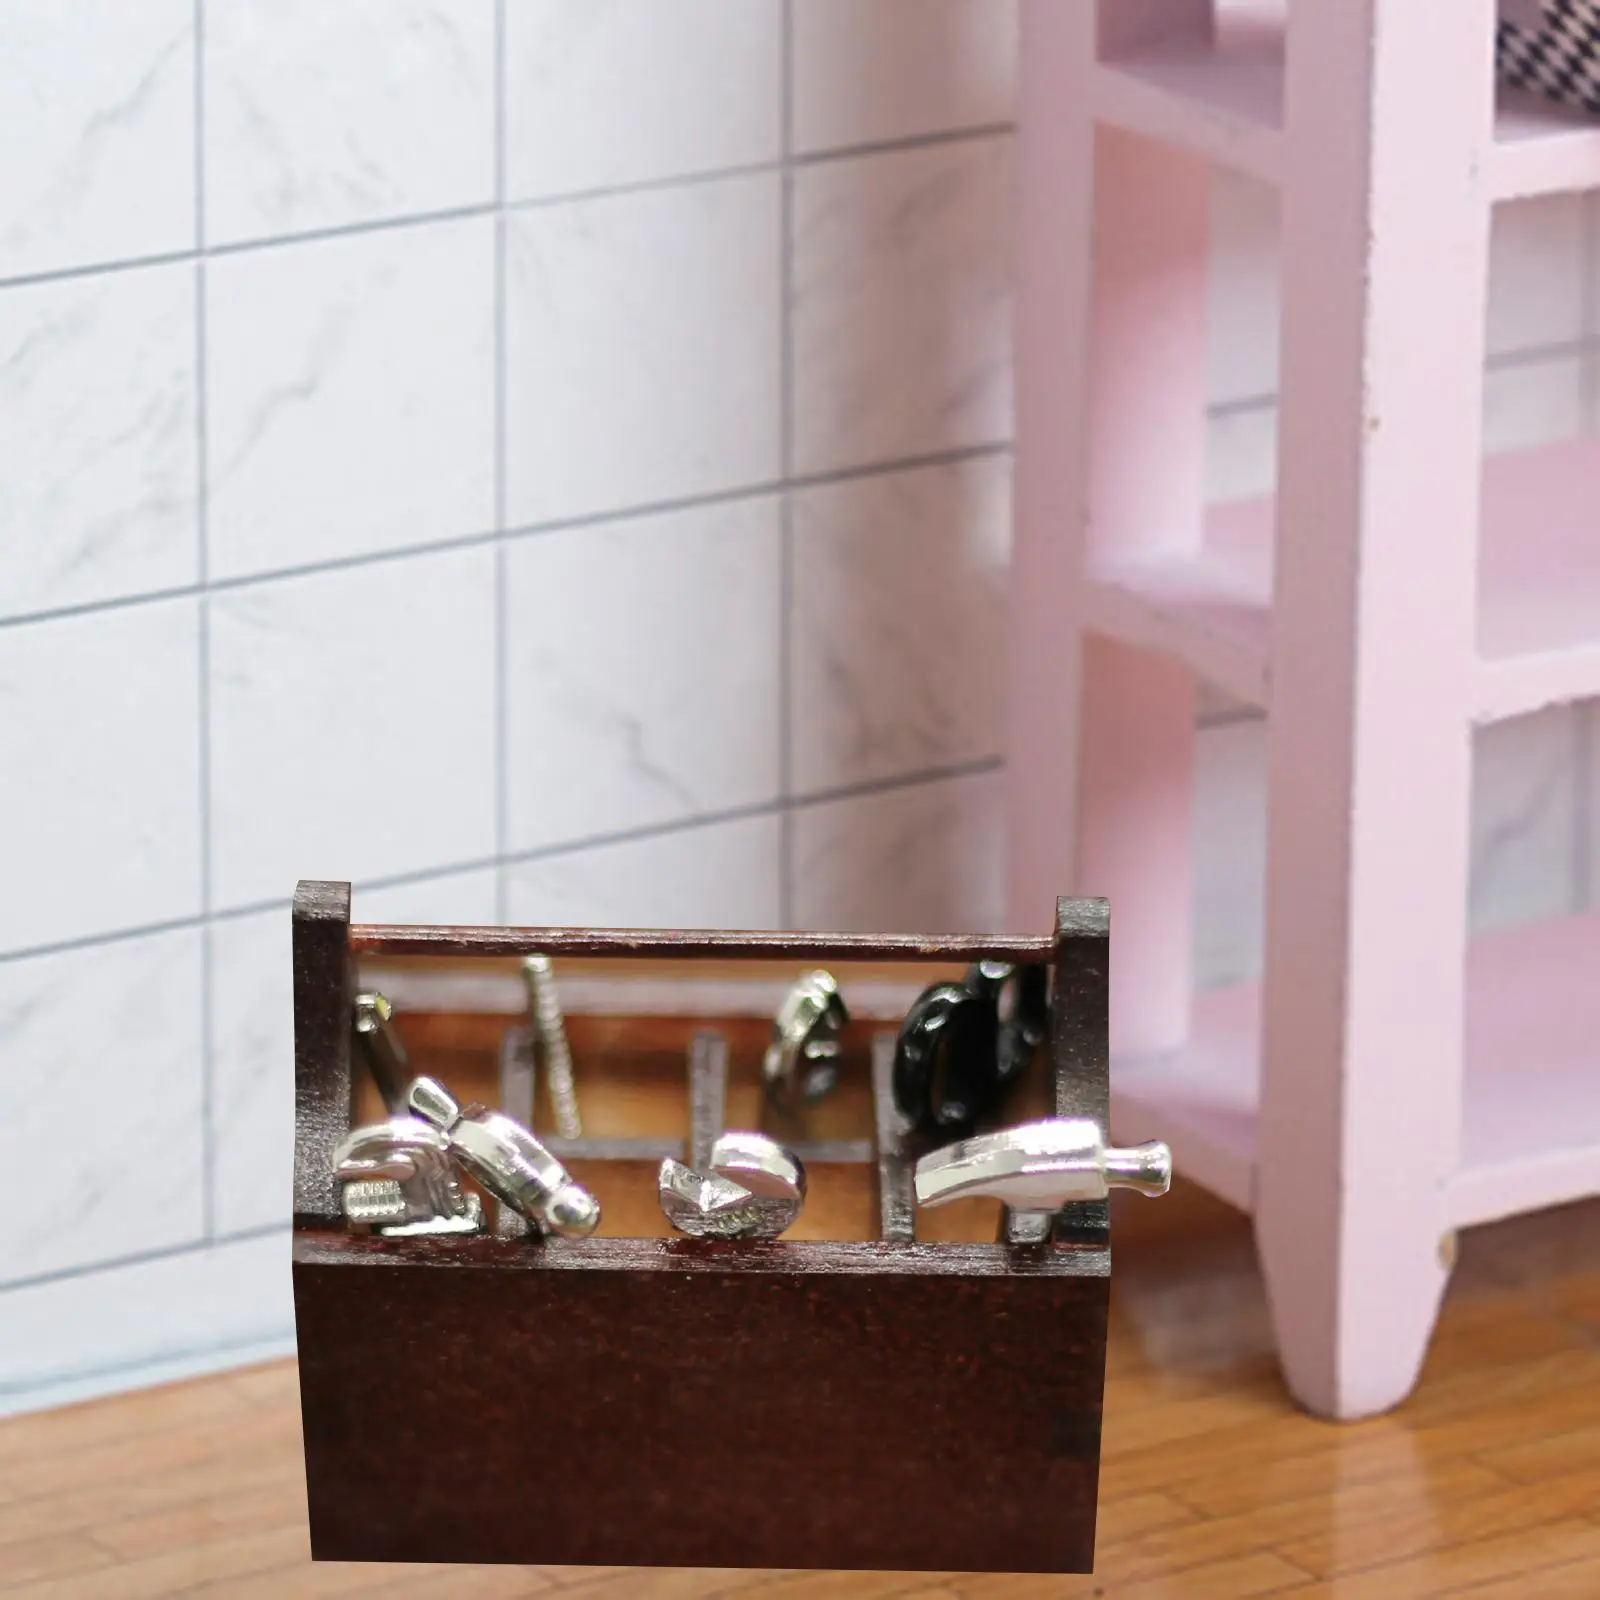 Dollhouse Repair Tools with Storage Case Micro Landscape Pretend Playset for Holiday Gifts